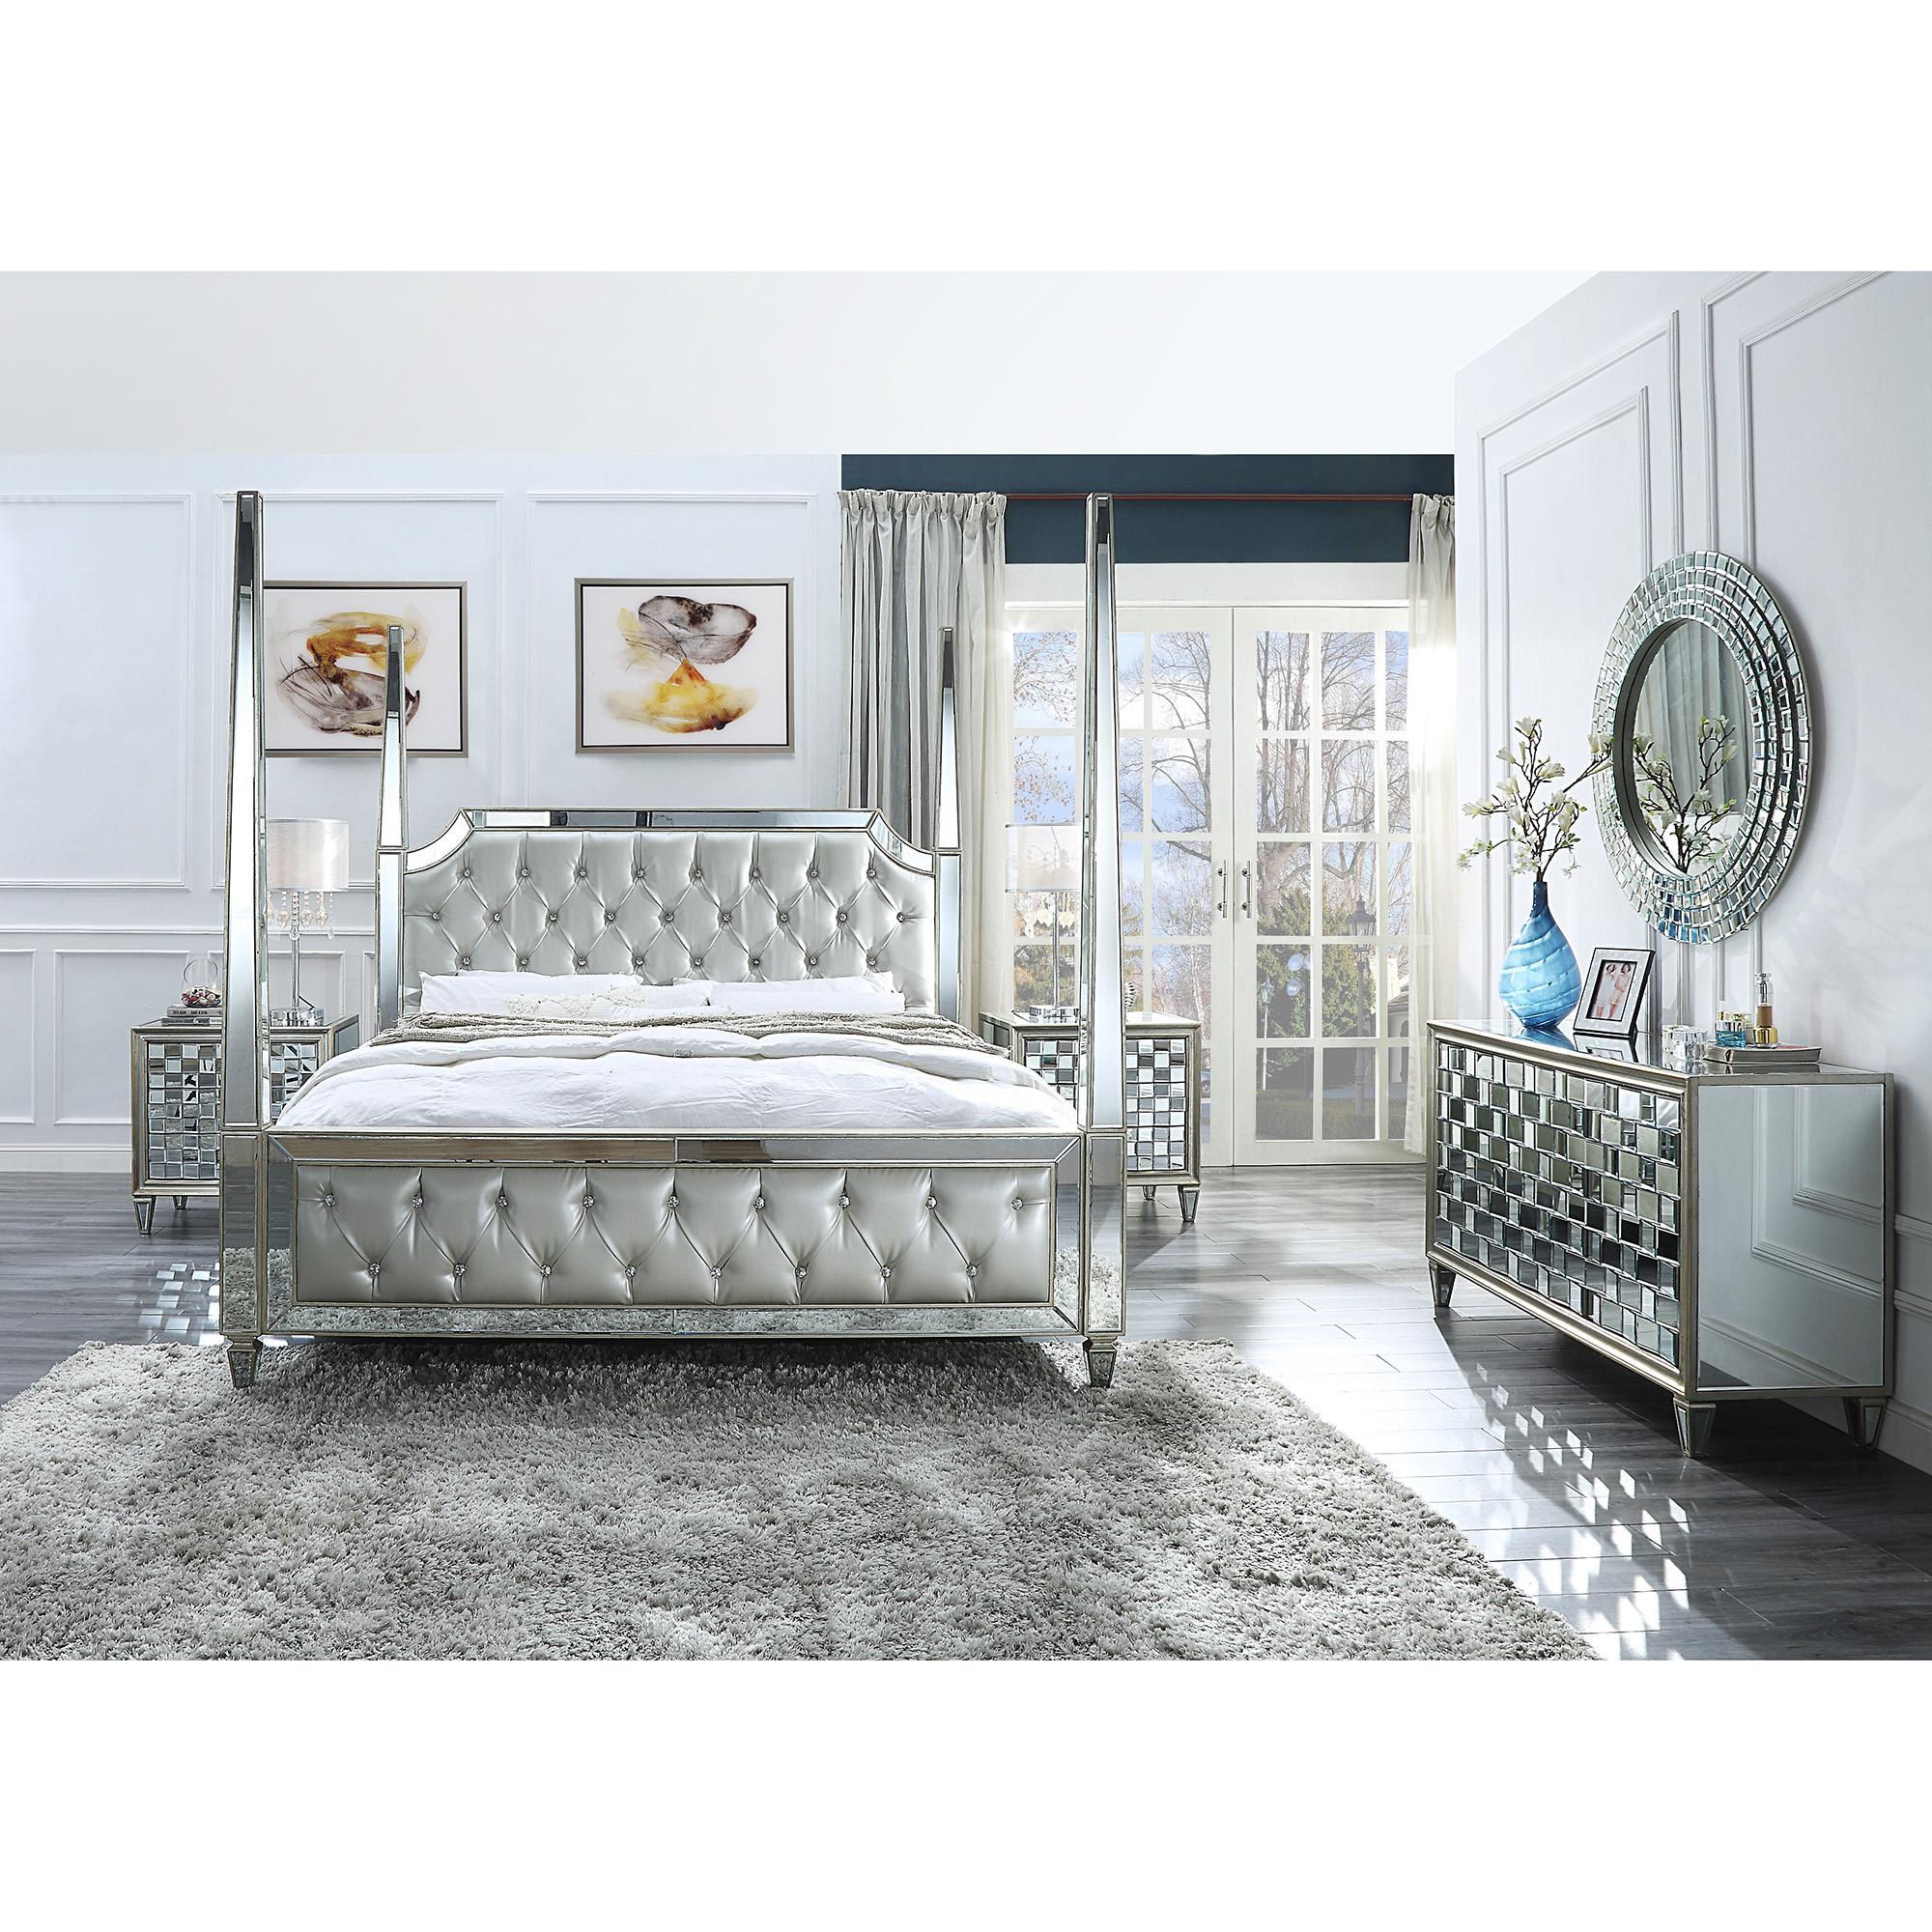 Modern Canopy Bedroom Set HD-6001 HD-CK6001-5PC-BEDROOM in Mirrored, Silver Faux Leather